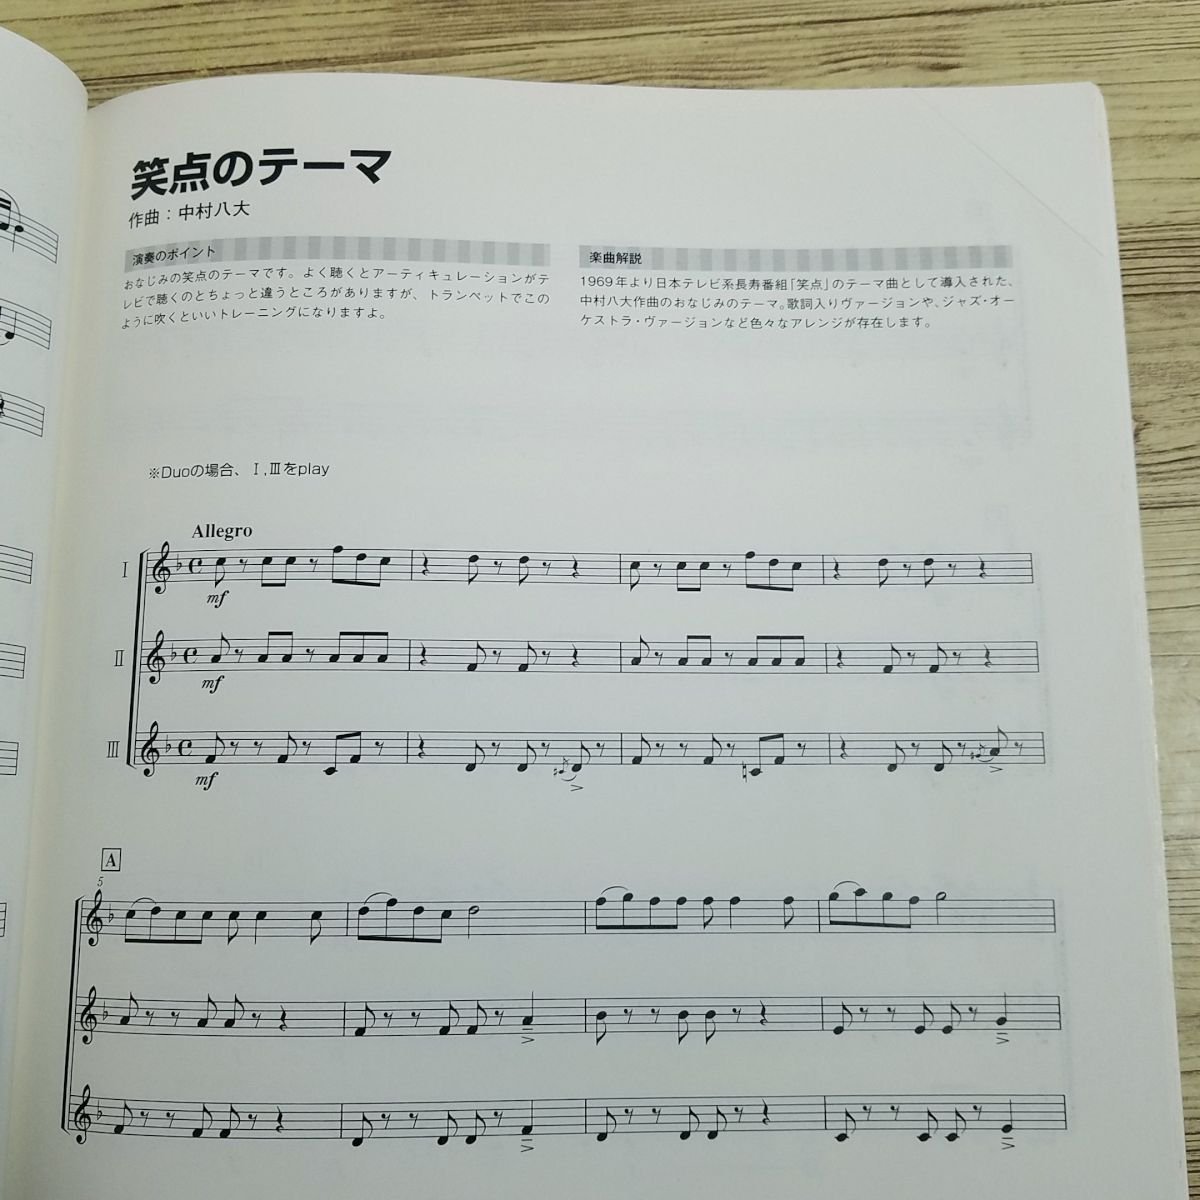  musical score [ trumpet Duo also! Trio also! comfortably ensemble ] 20 bending J-POP western-style music anime song Classic other [ postage 180 jpy ]